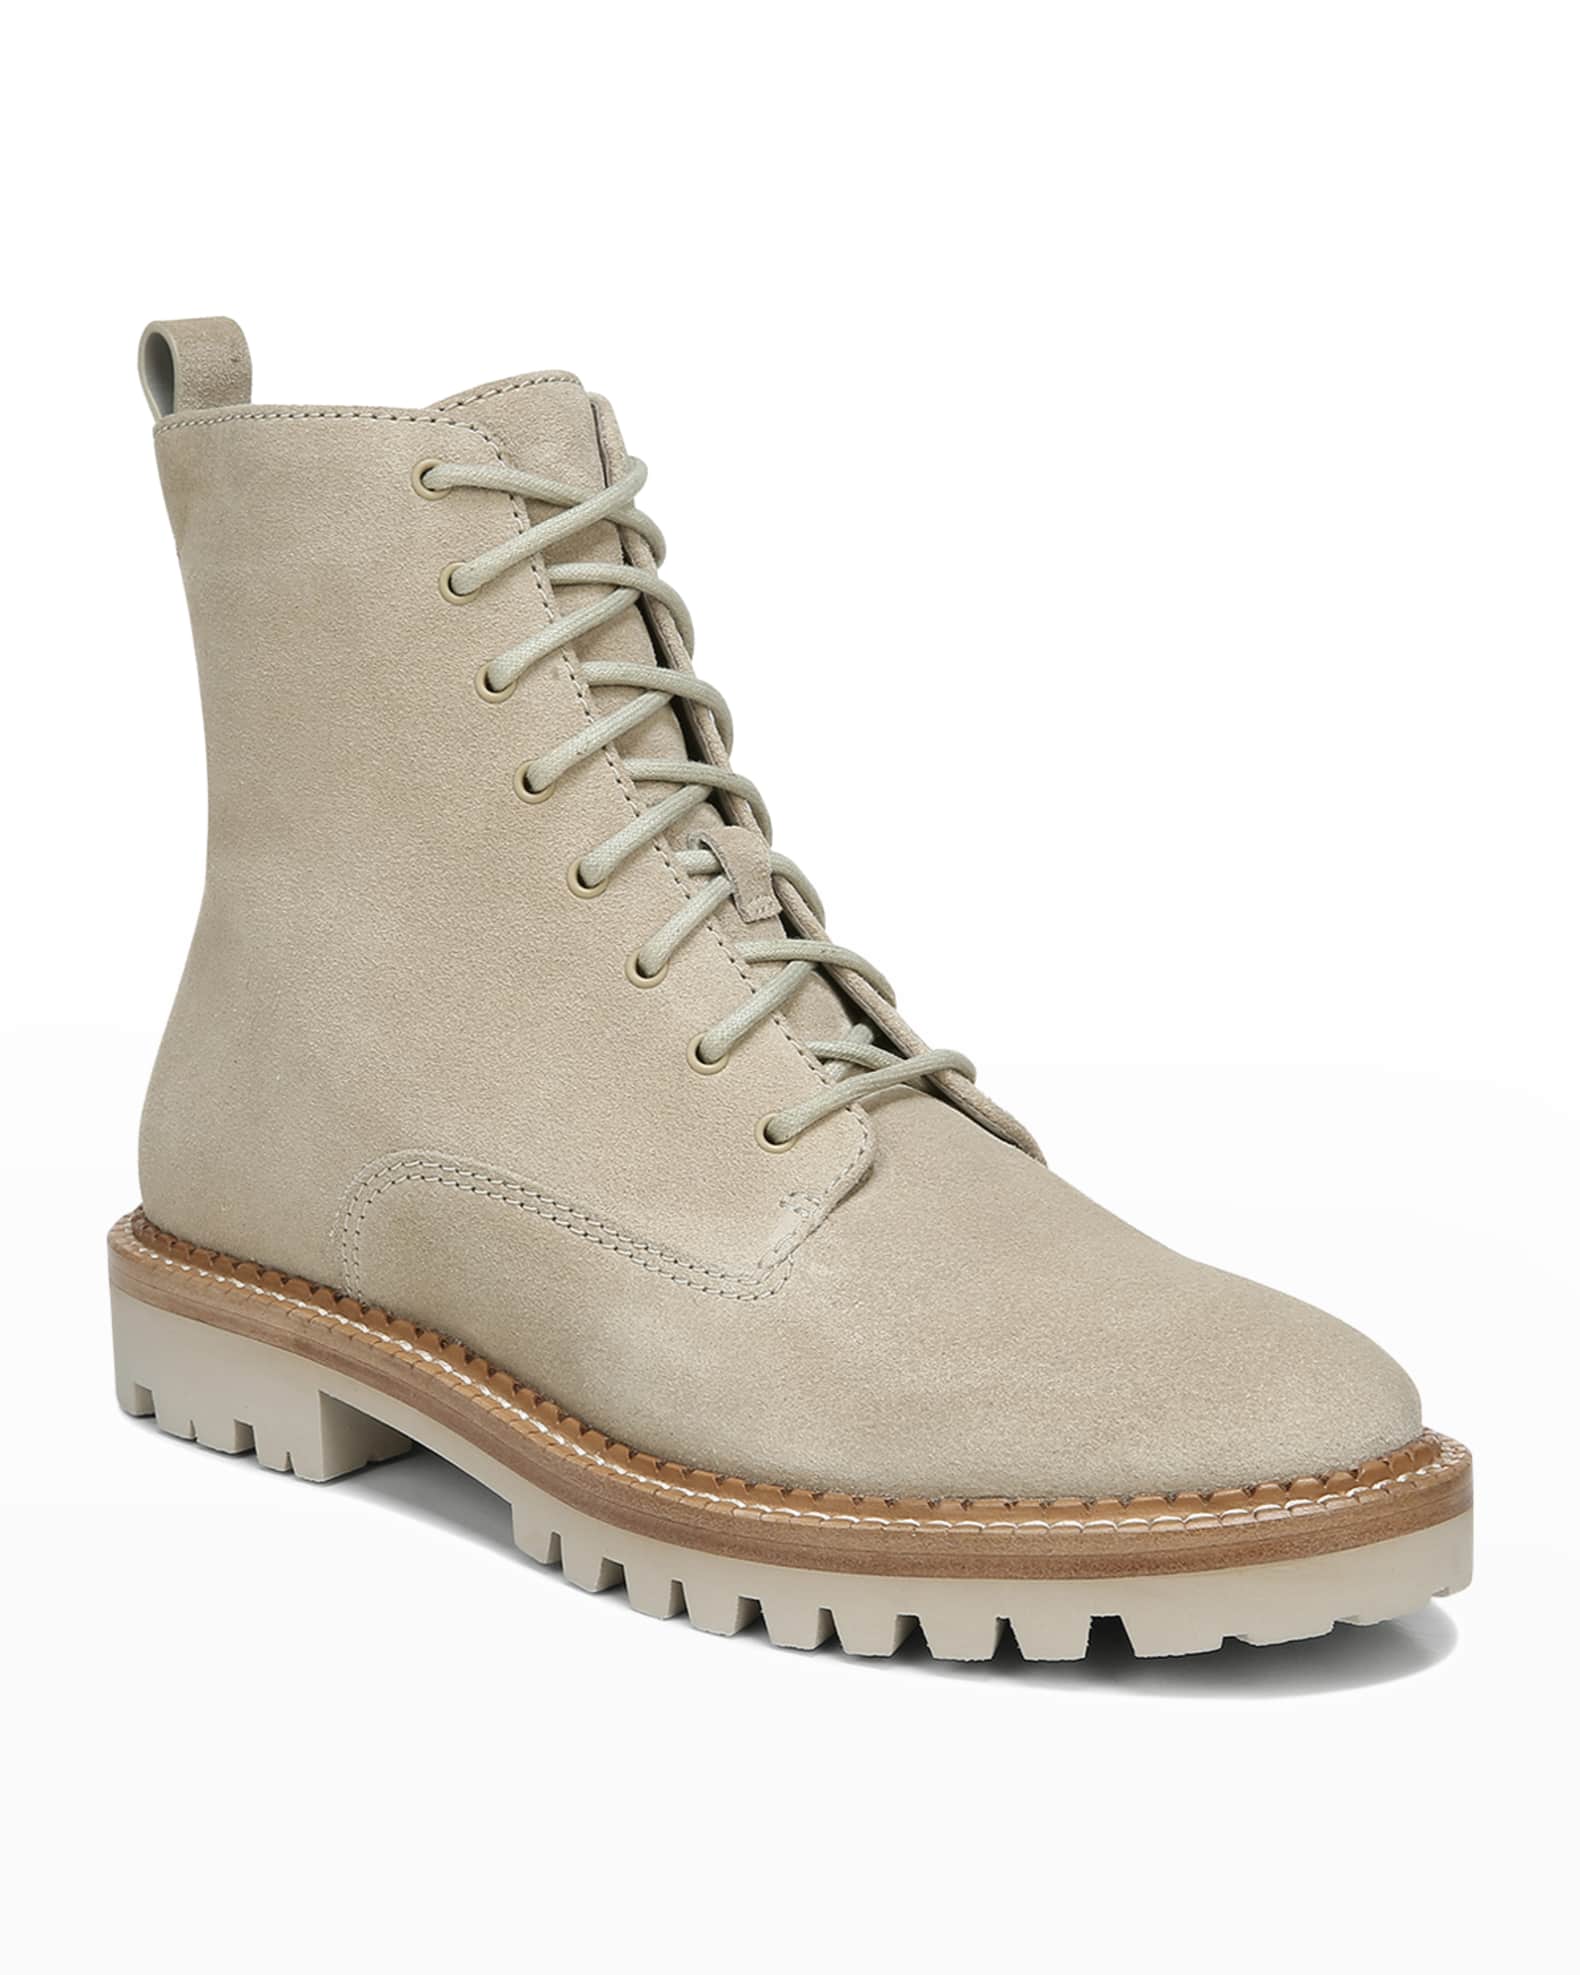 Vince Cabria Suede Water-Repellant Combat Boots | Neiman Marcus